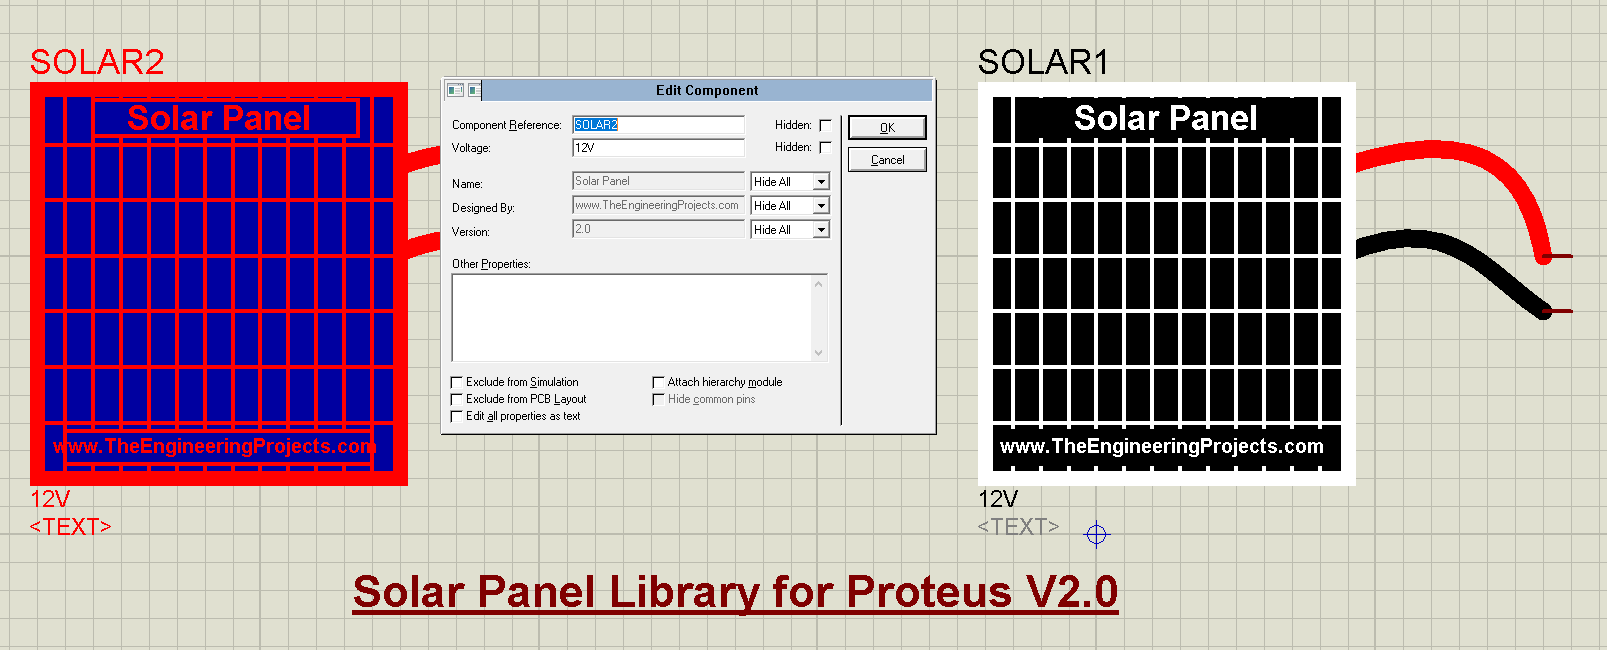 Solar Panel Library for Proteus, Solar Panel in Proteus, Solar Panel Library Proteus, Solar Panel Proteus, Solar Panel Proteus simulation, Proteus Solar Panel, Proteus simulation of Solar Panel